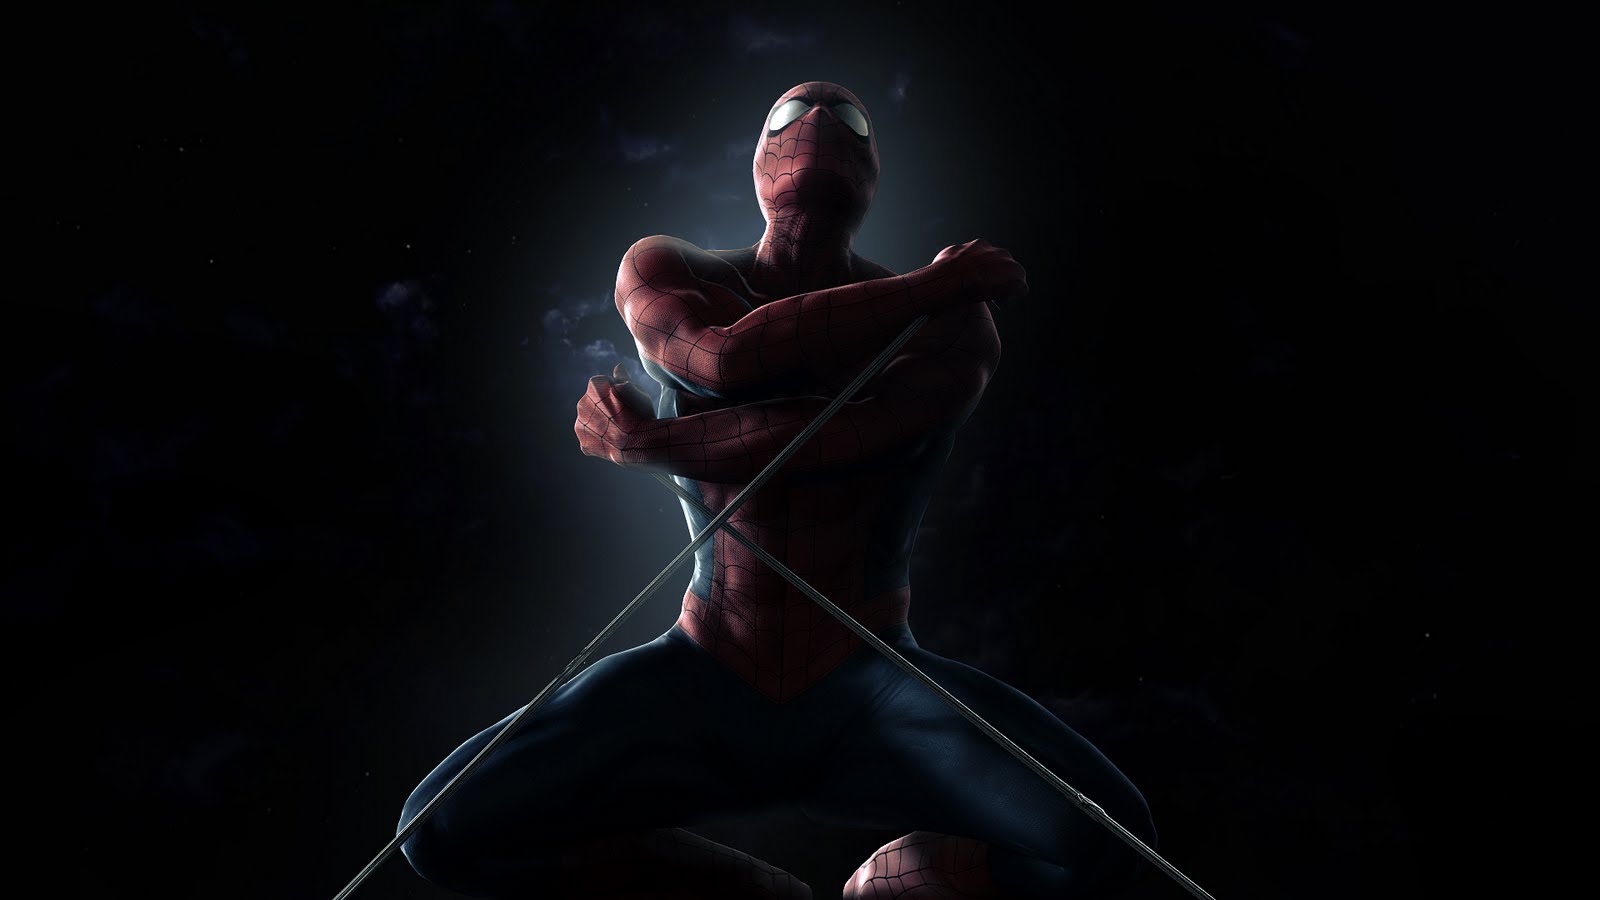 Spiderman 4 HD Wallpapers Spiderman 4 Images Cool Wallpapers